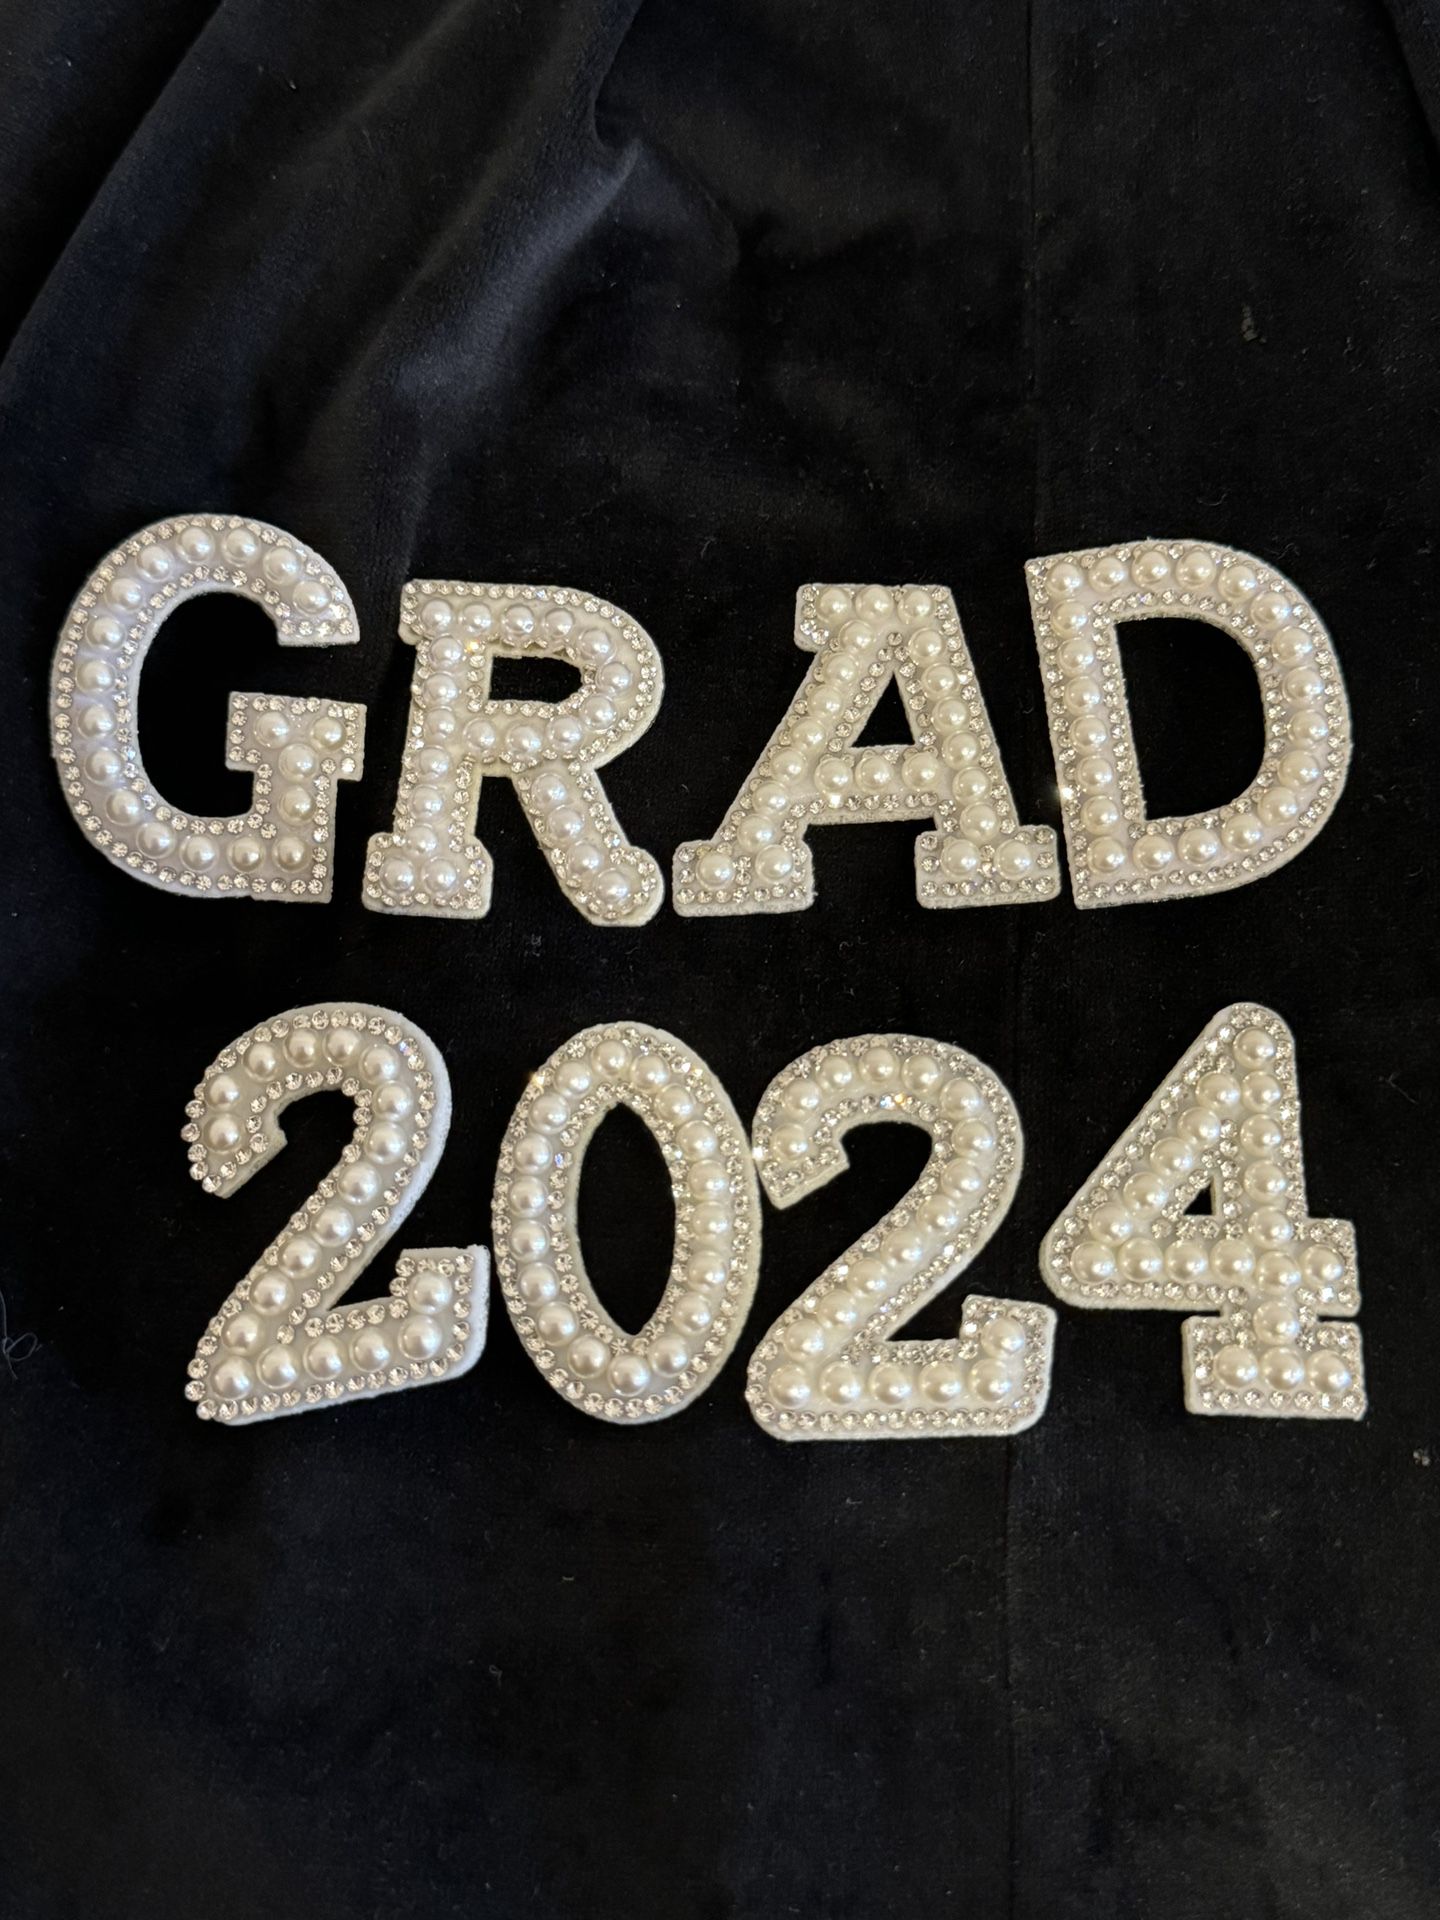 Grad 2024 Letters Iron On Glue On Sew On Letters Patches Pearl Rhinestone 